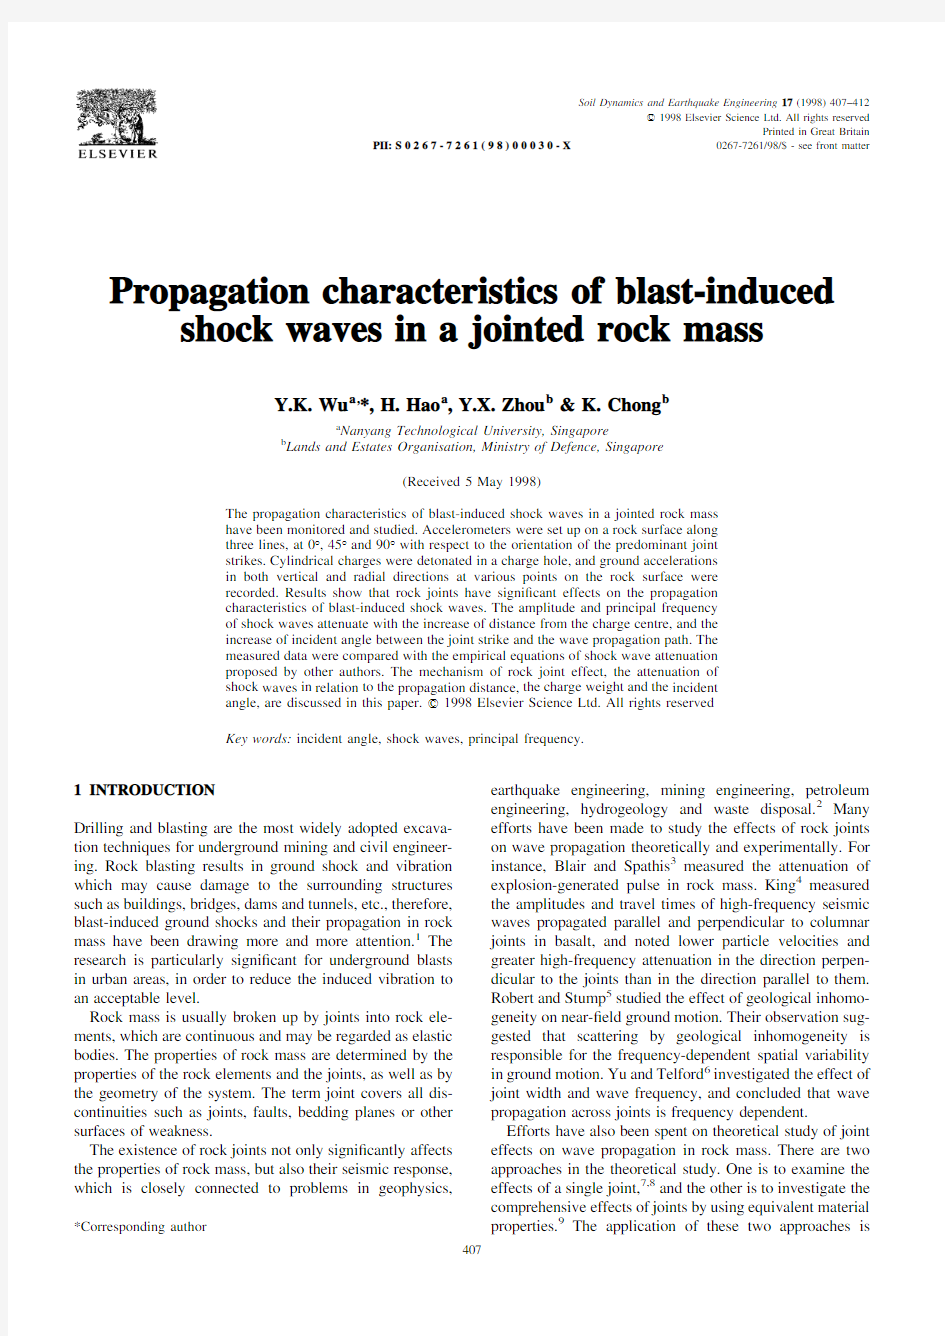 Propagation characteristics of blast-induced shock waves in a jointed rock mass